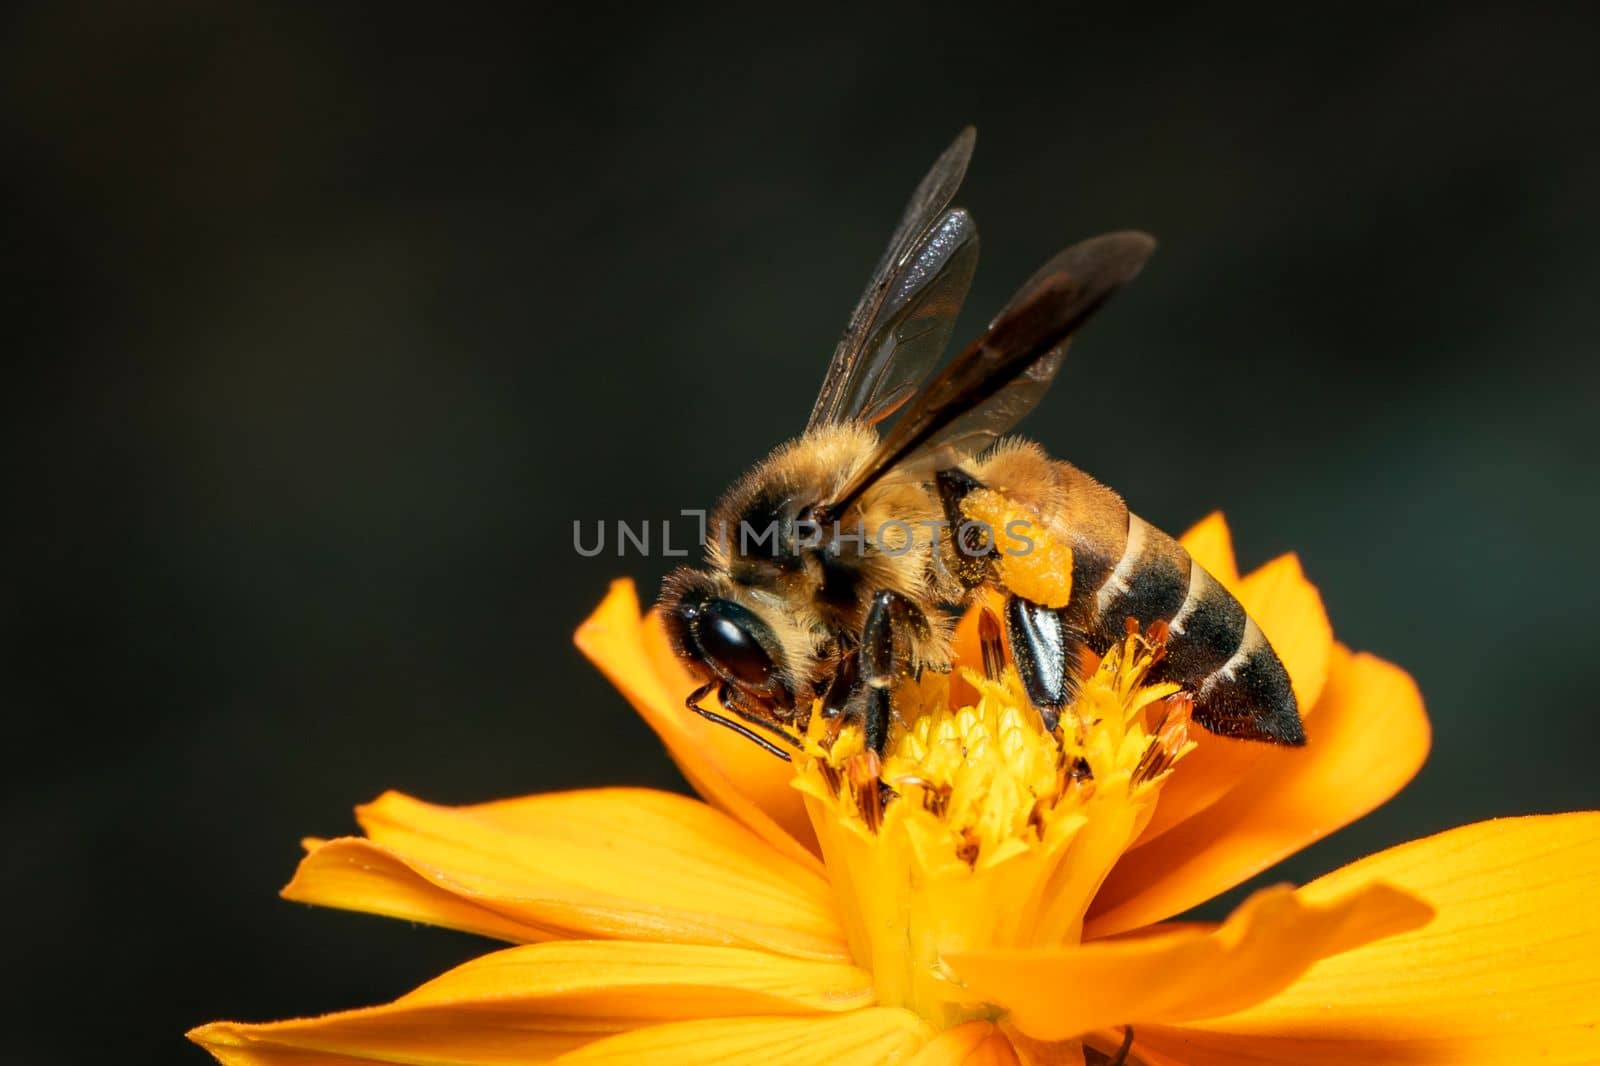 Image of giant honey bee(Apis dorsata) on yellow flower collects nectar on a natural background. Golden honeybee on flower pollen. Insect. Animal.